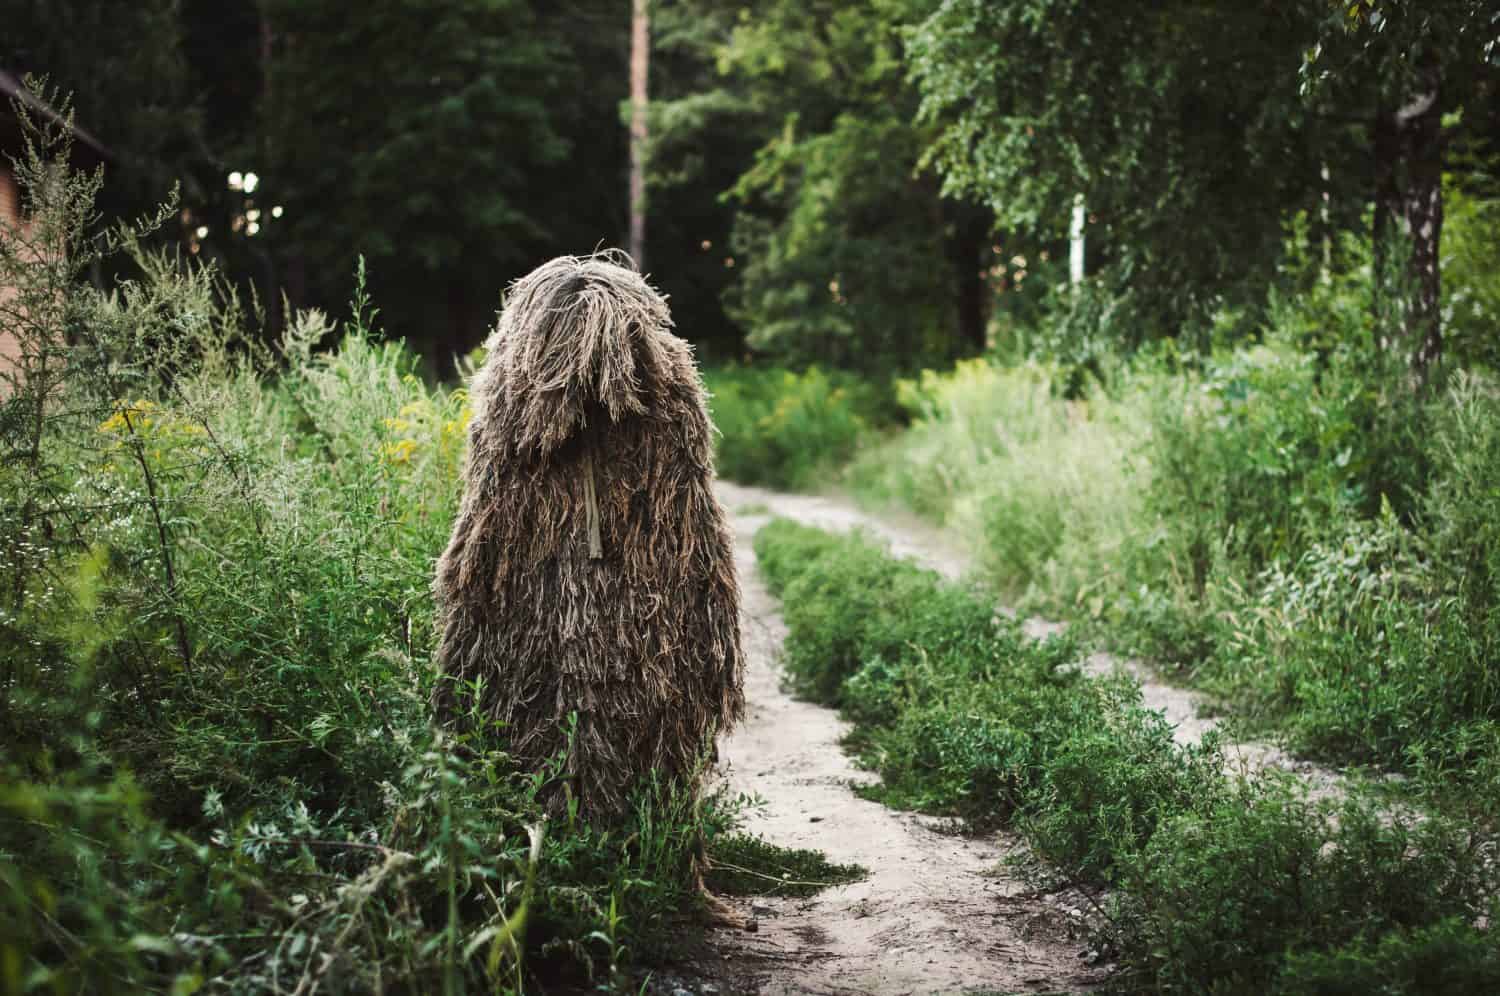 Special camouflage ghillie suit for snipers and intelligence agents.